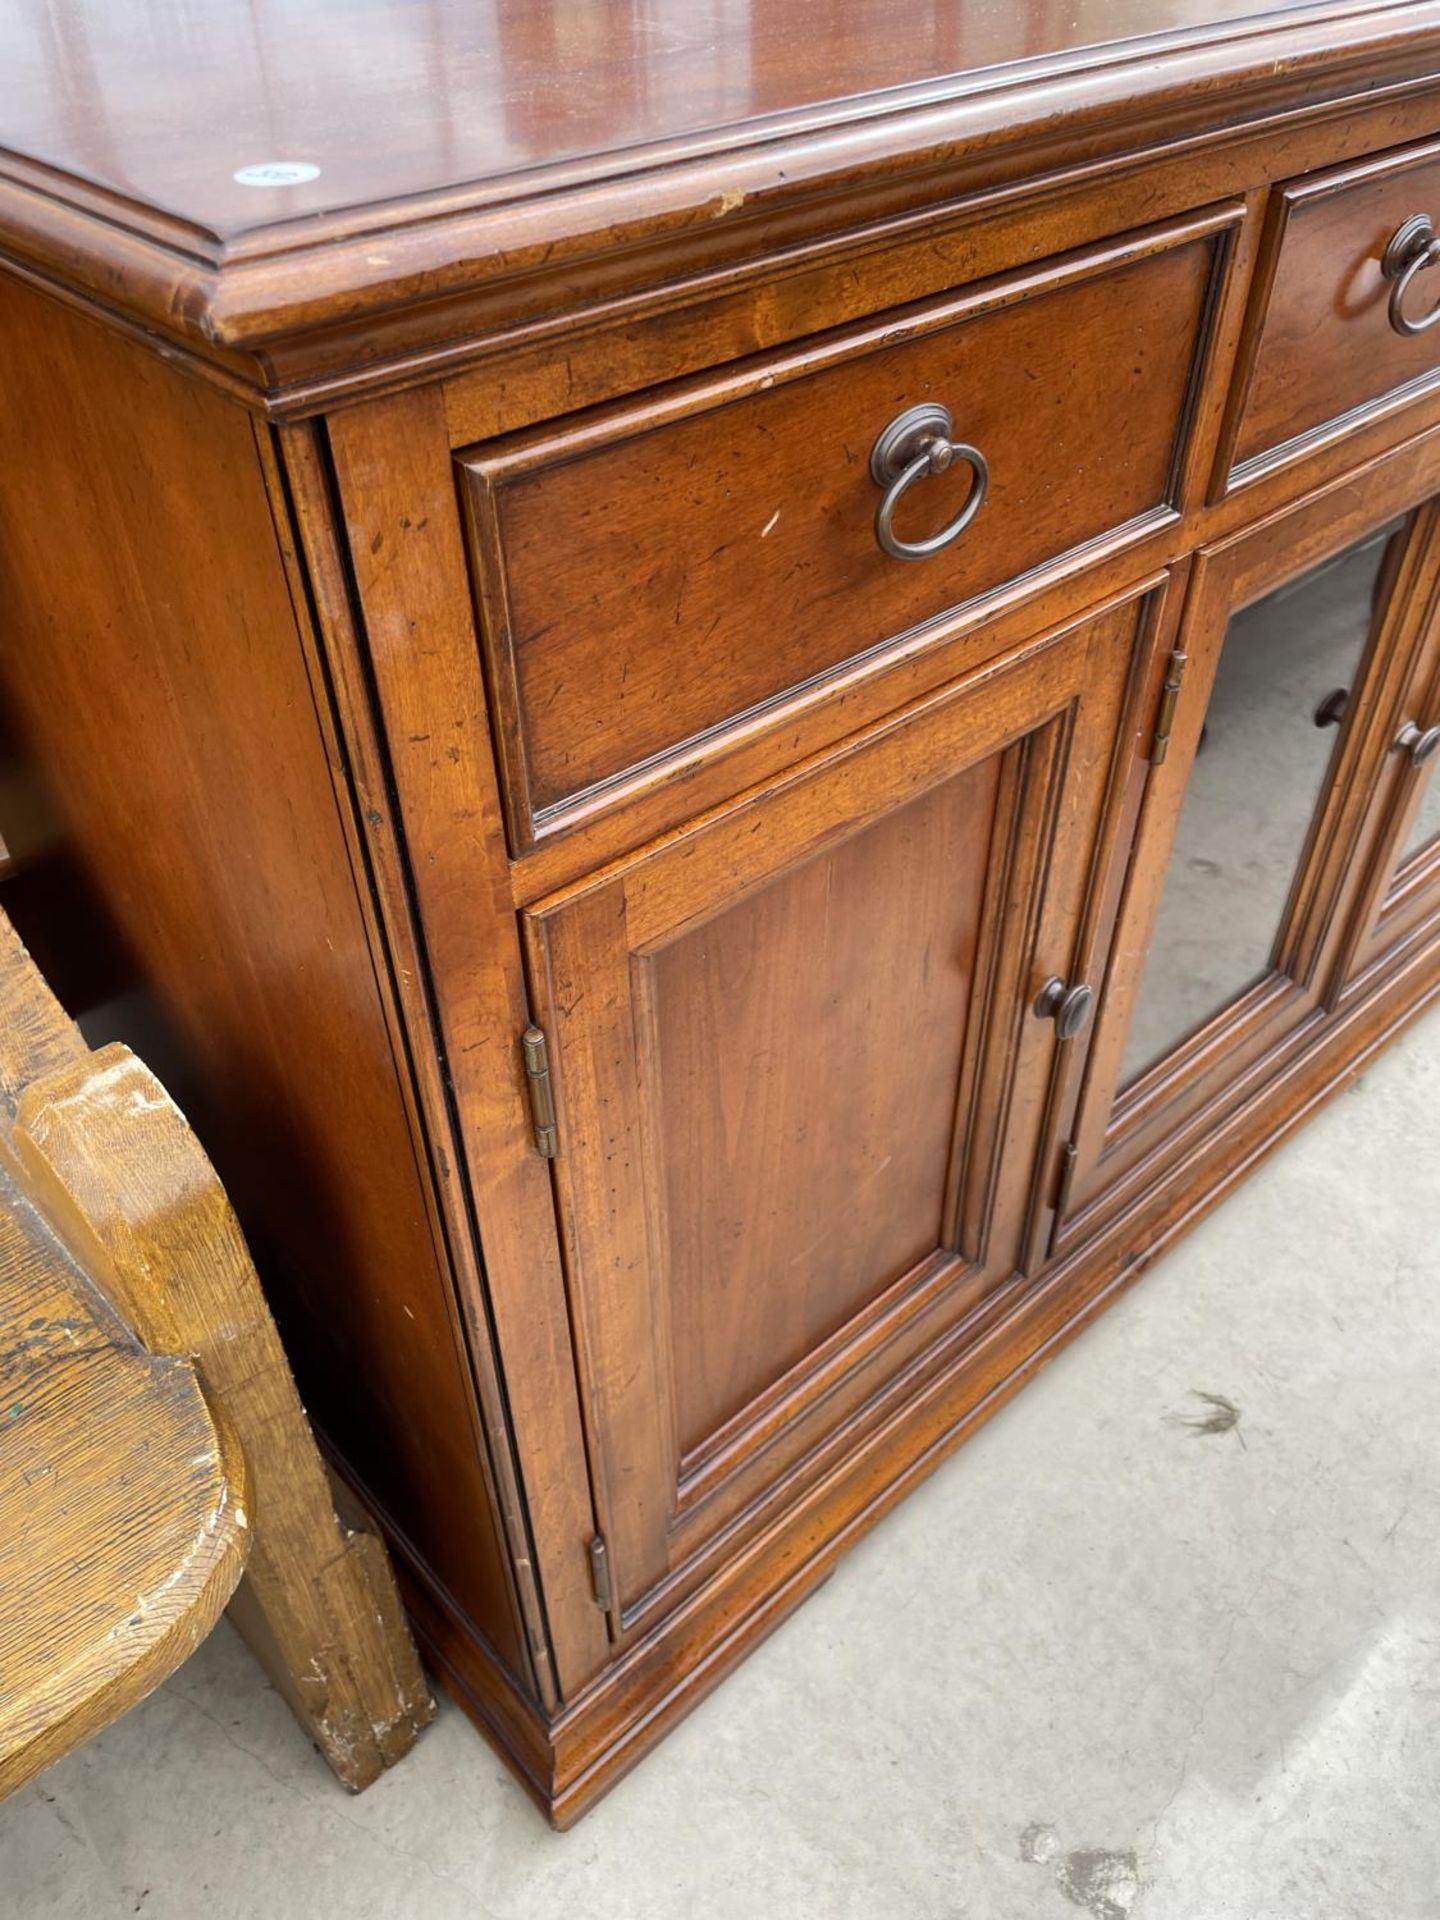 A THOMASVILLE CHERRY WOOD SIDEBOARD/STEREO CABINET, 64" WIDE - Image 3 of 5